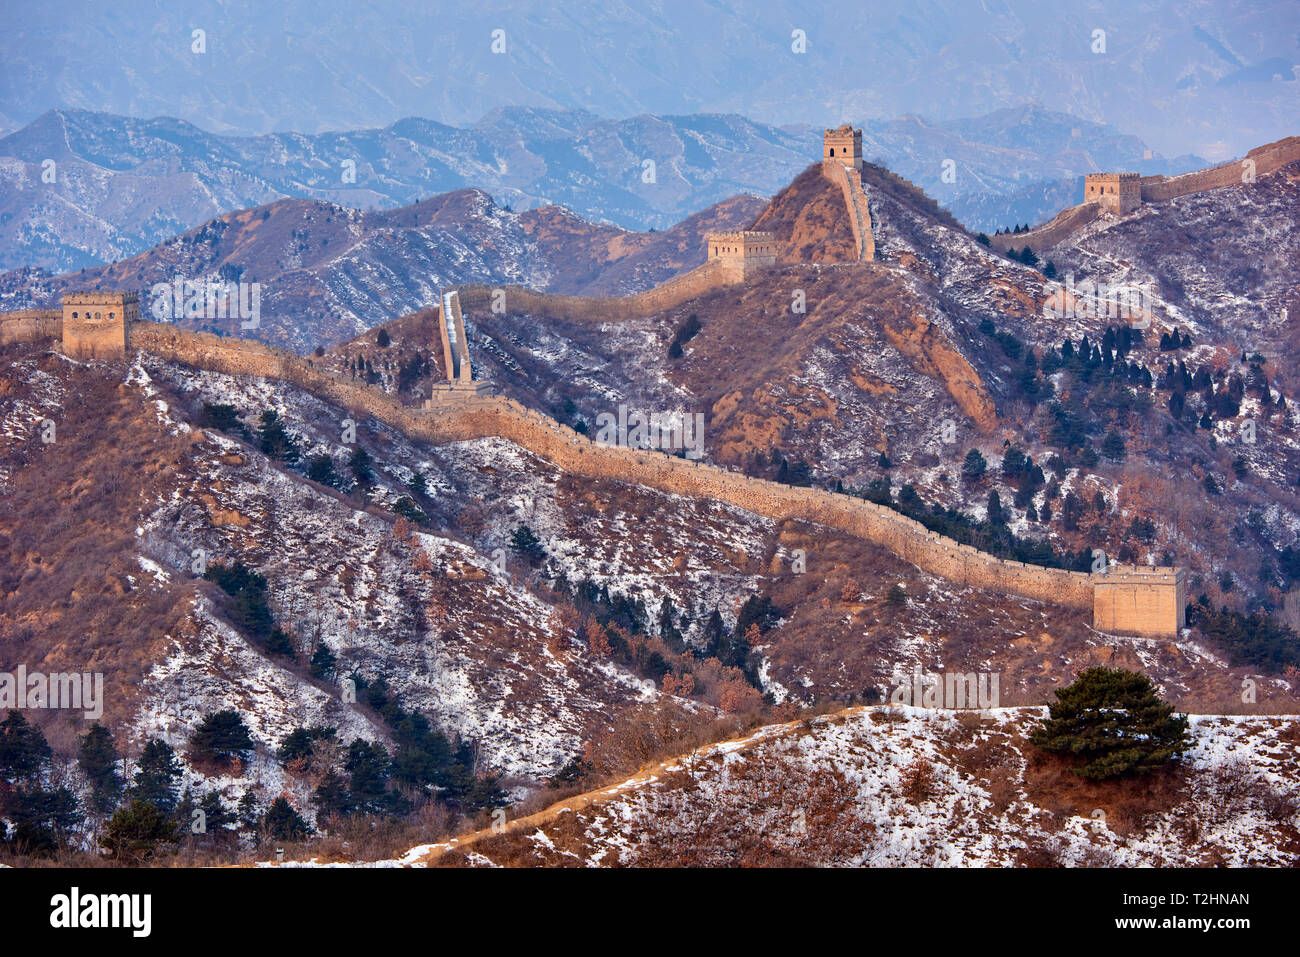 Aerial view of the Jinshanling and Simatai sections of the Great Wall of China, Unesco World Heritage Site, China, East Asia Stock Photo